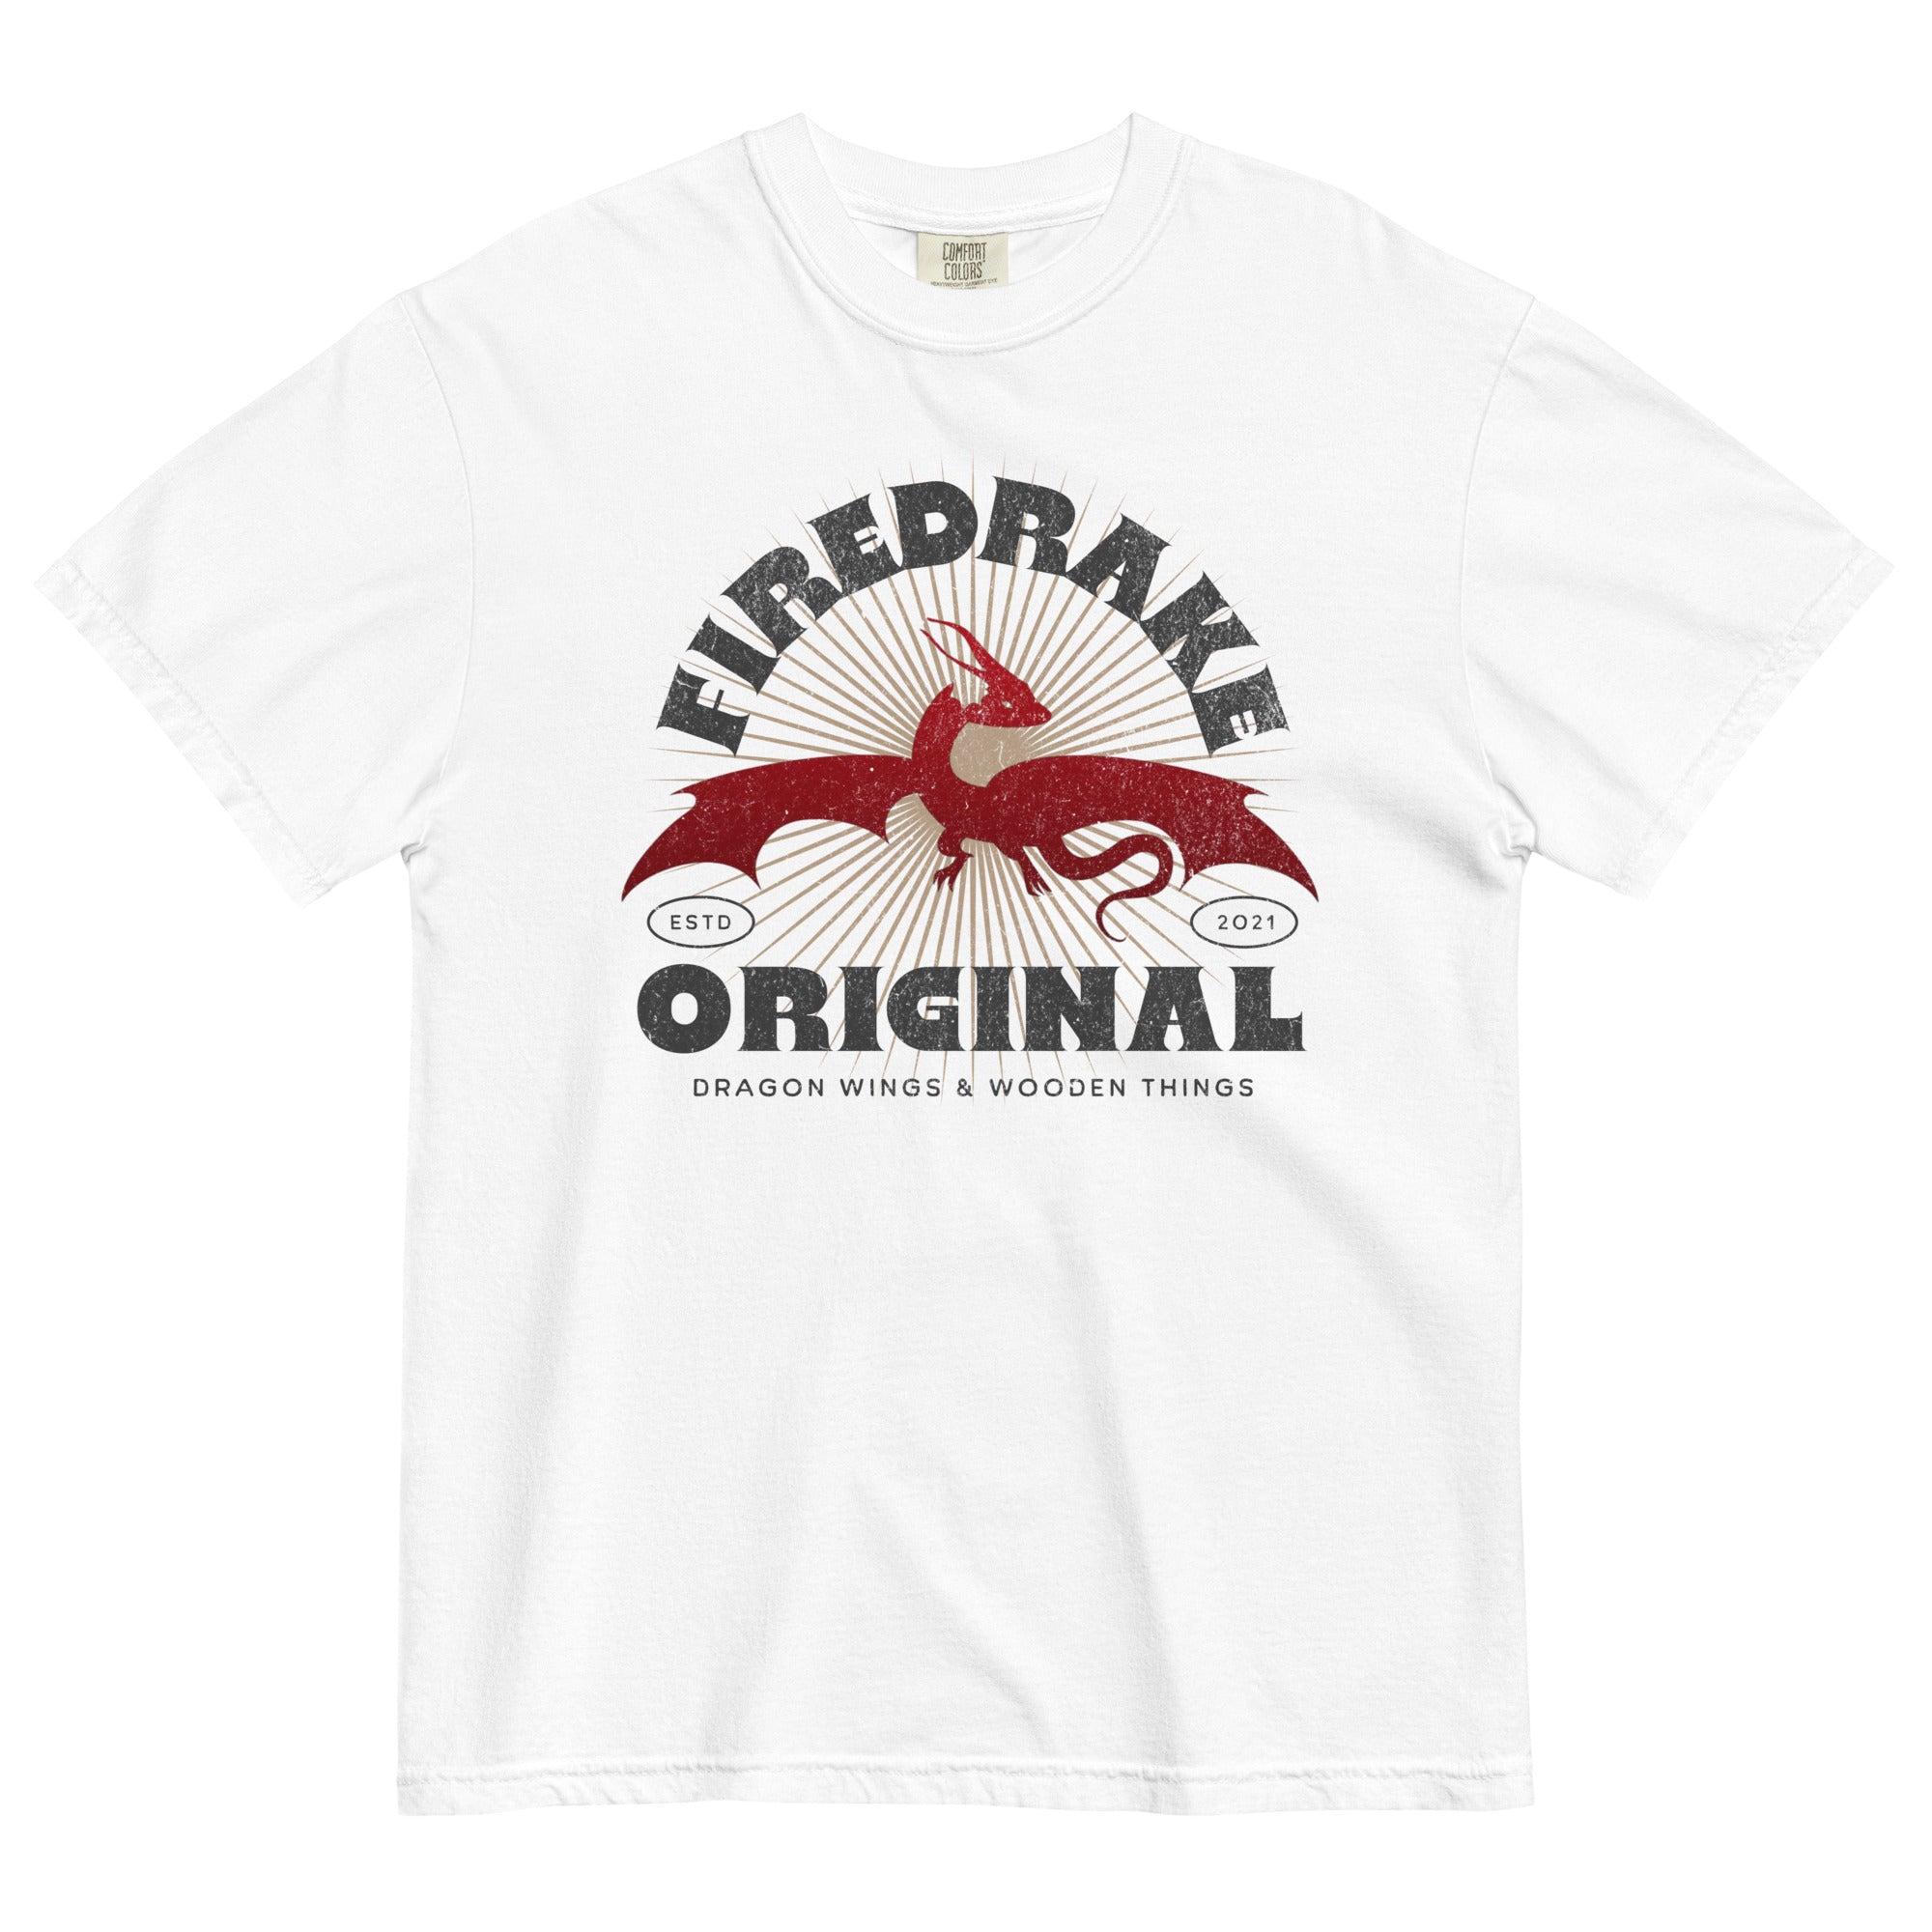 "FireDrake Original - Dragon Wings & Wooden Things" T-Shirt by FireDrake Artistry™, white color